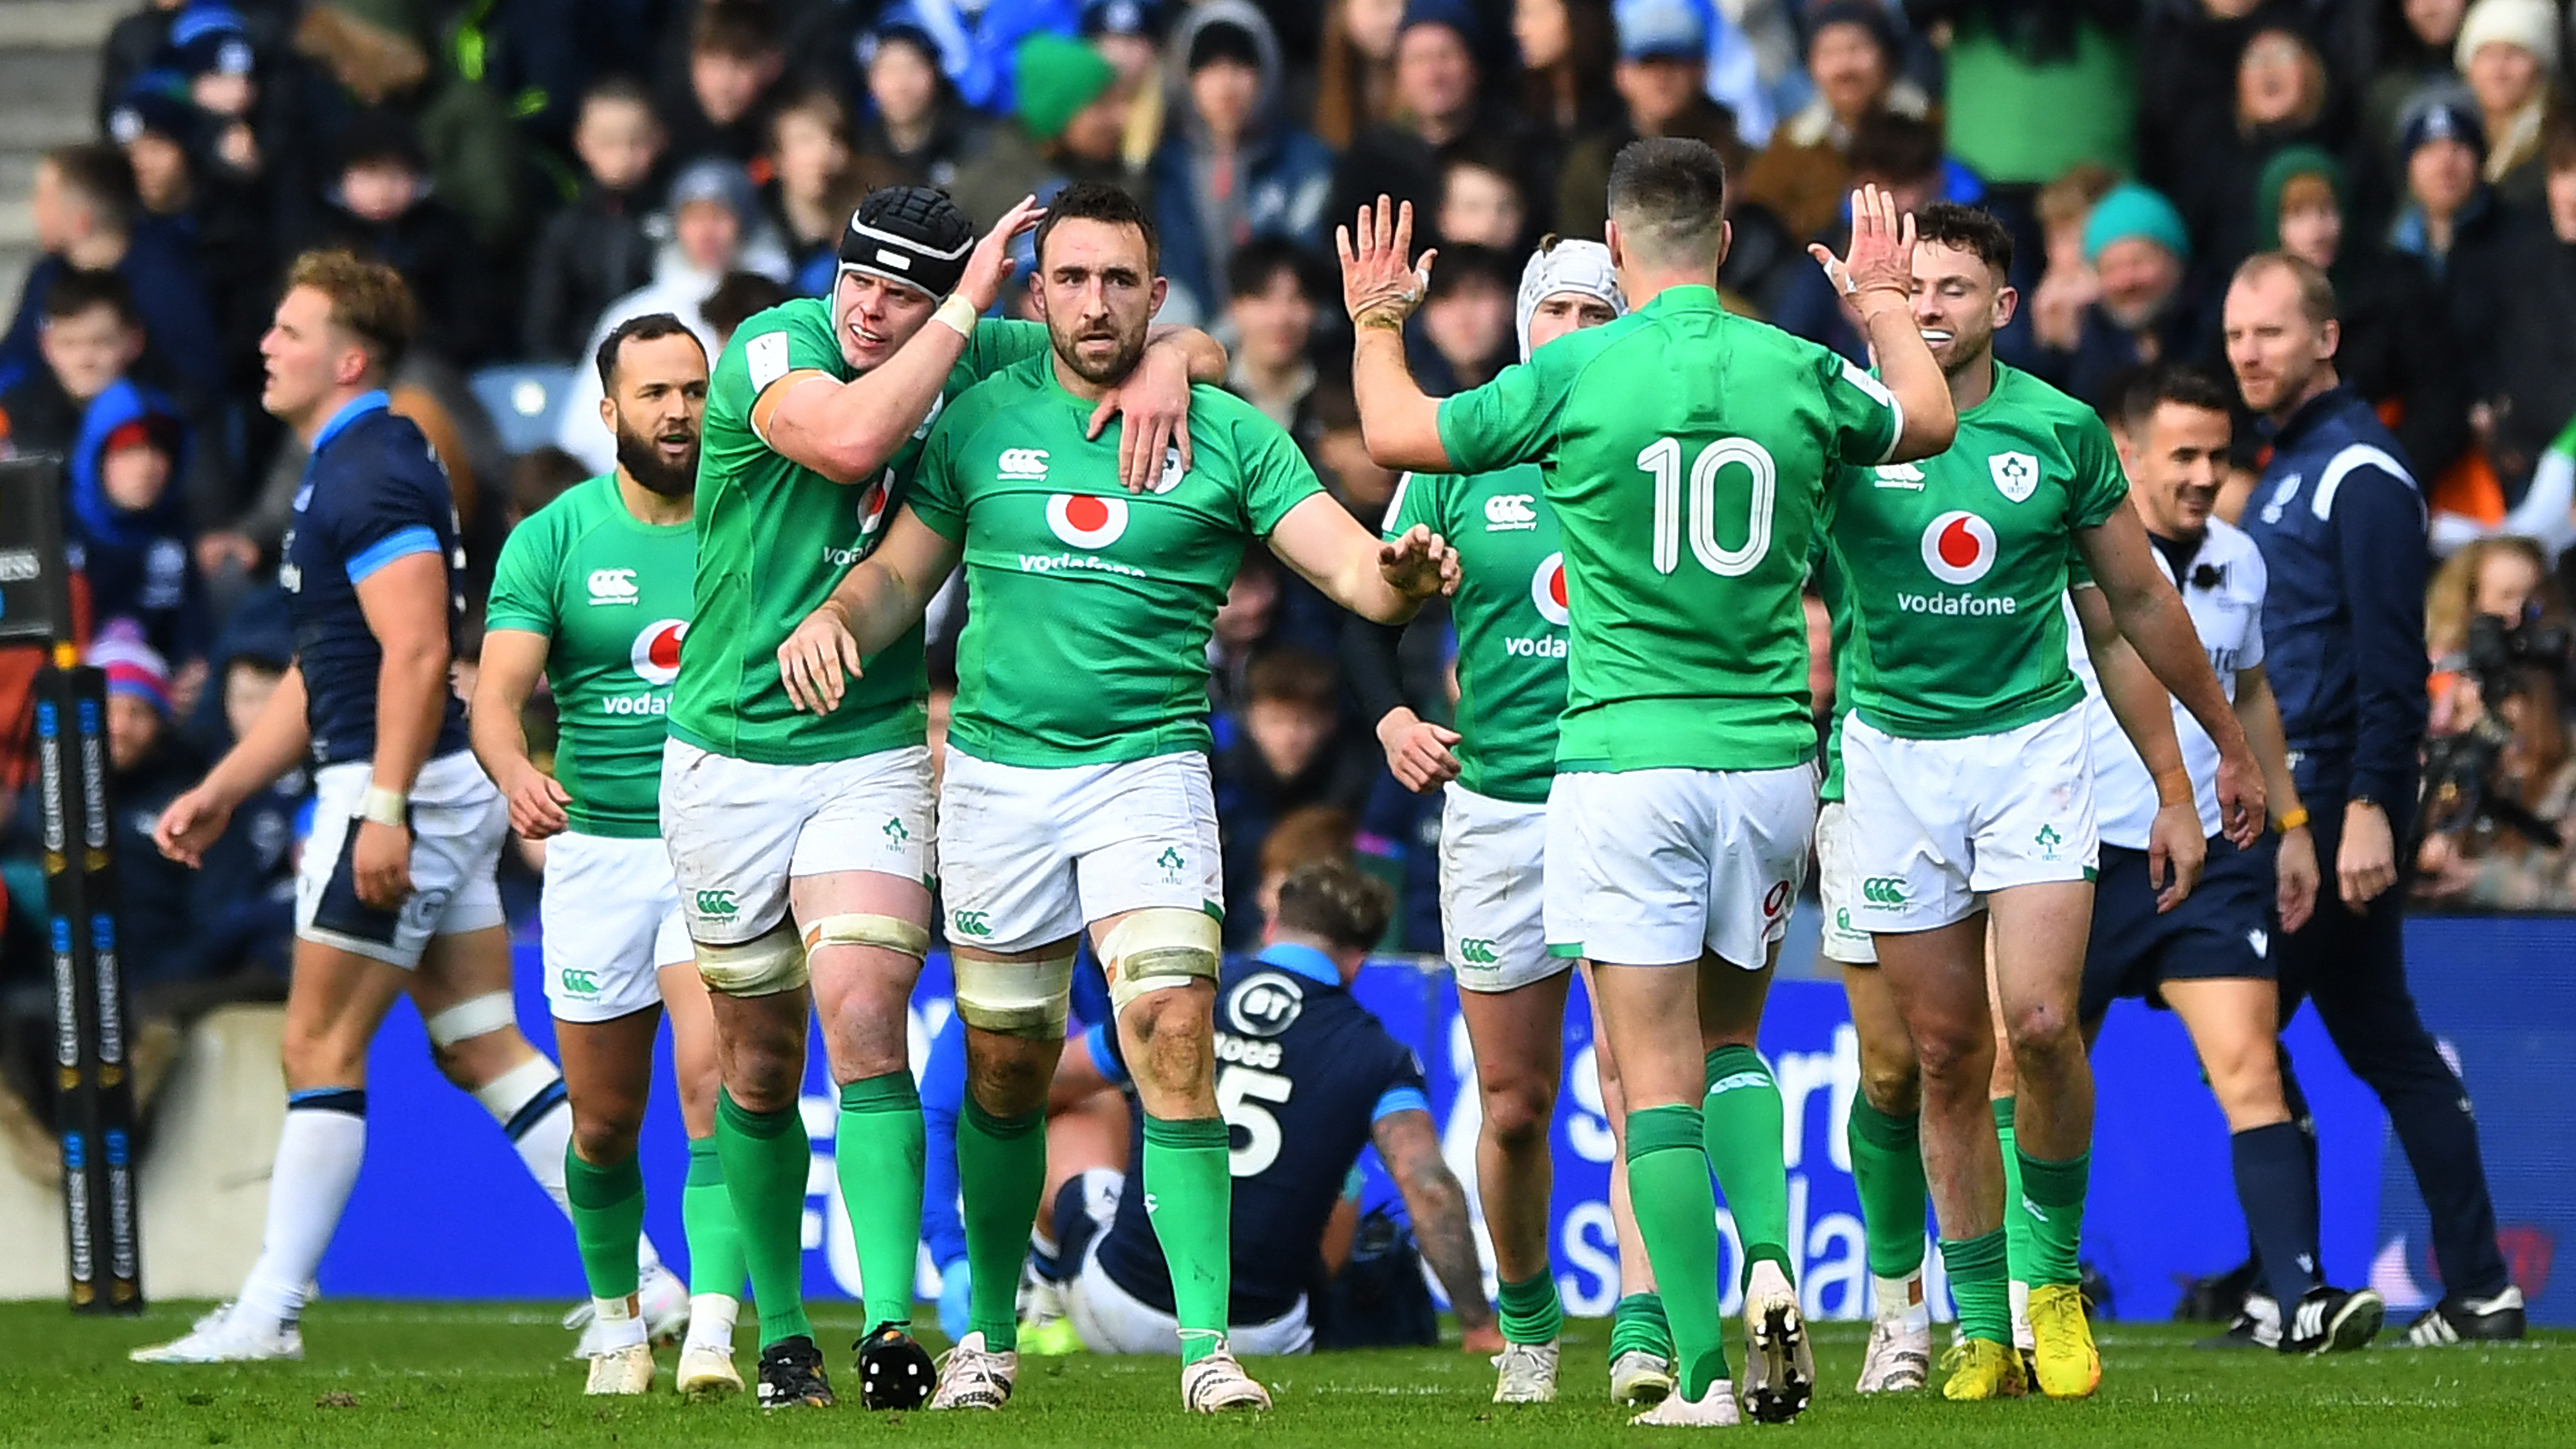 Ireland's Jack Conan (3L) celebrates after scoring the team's third try during the Six Nations international rugby union match between Scotland and Ireland at Murrayfield Stadium in Edinburgh, Scotland. /AFP